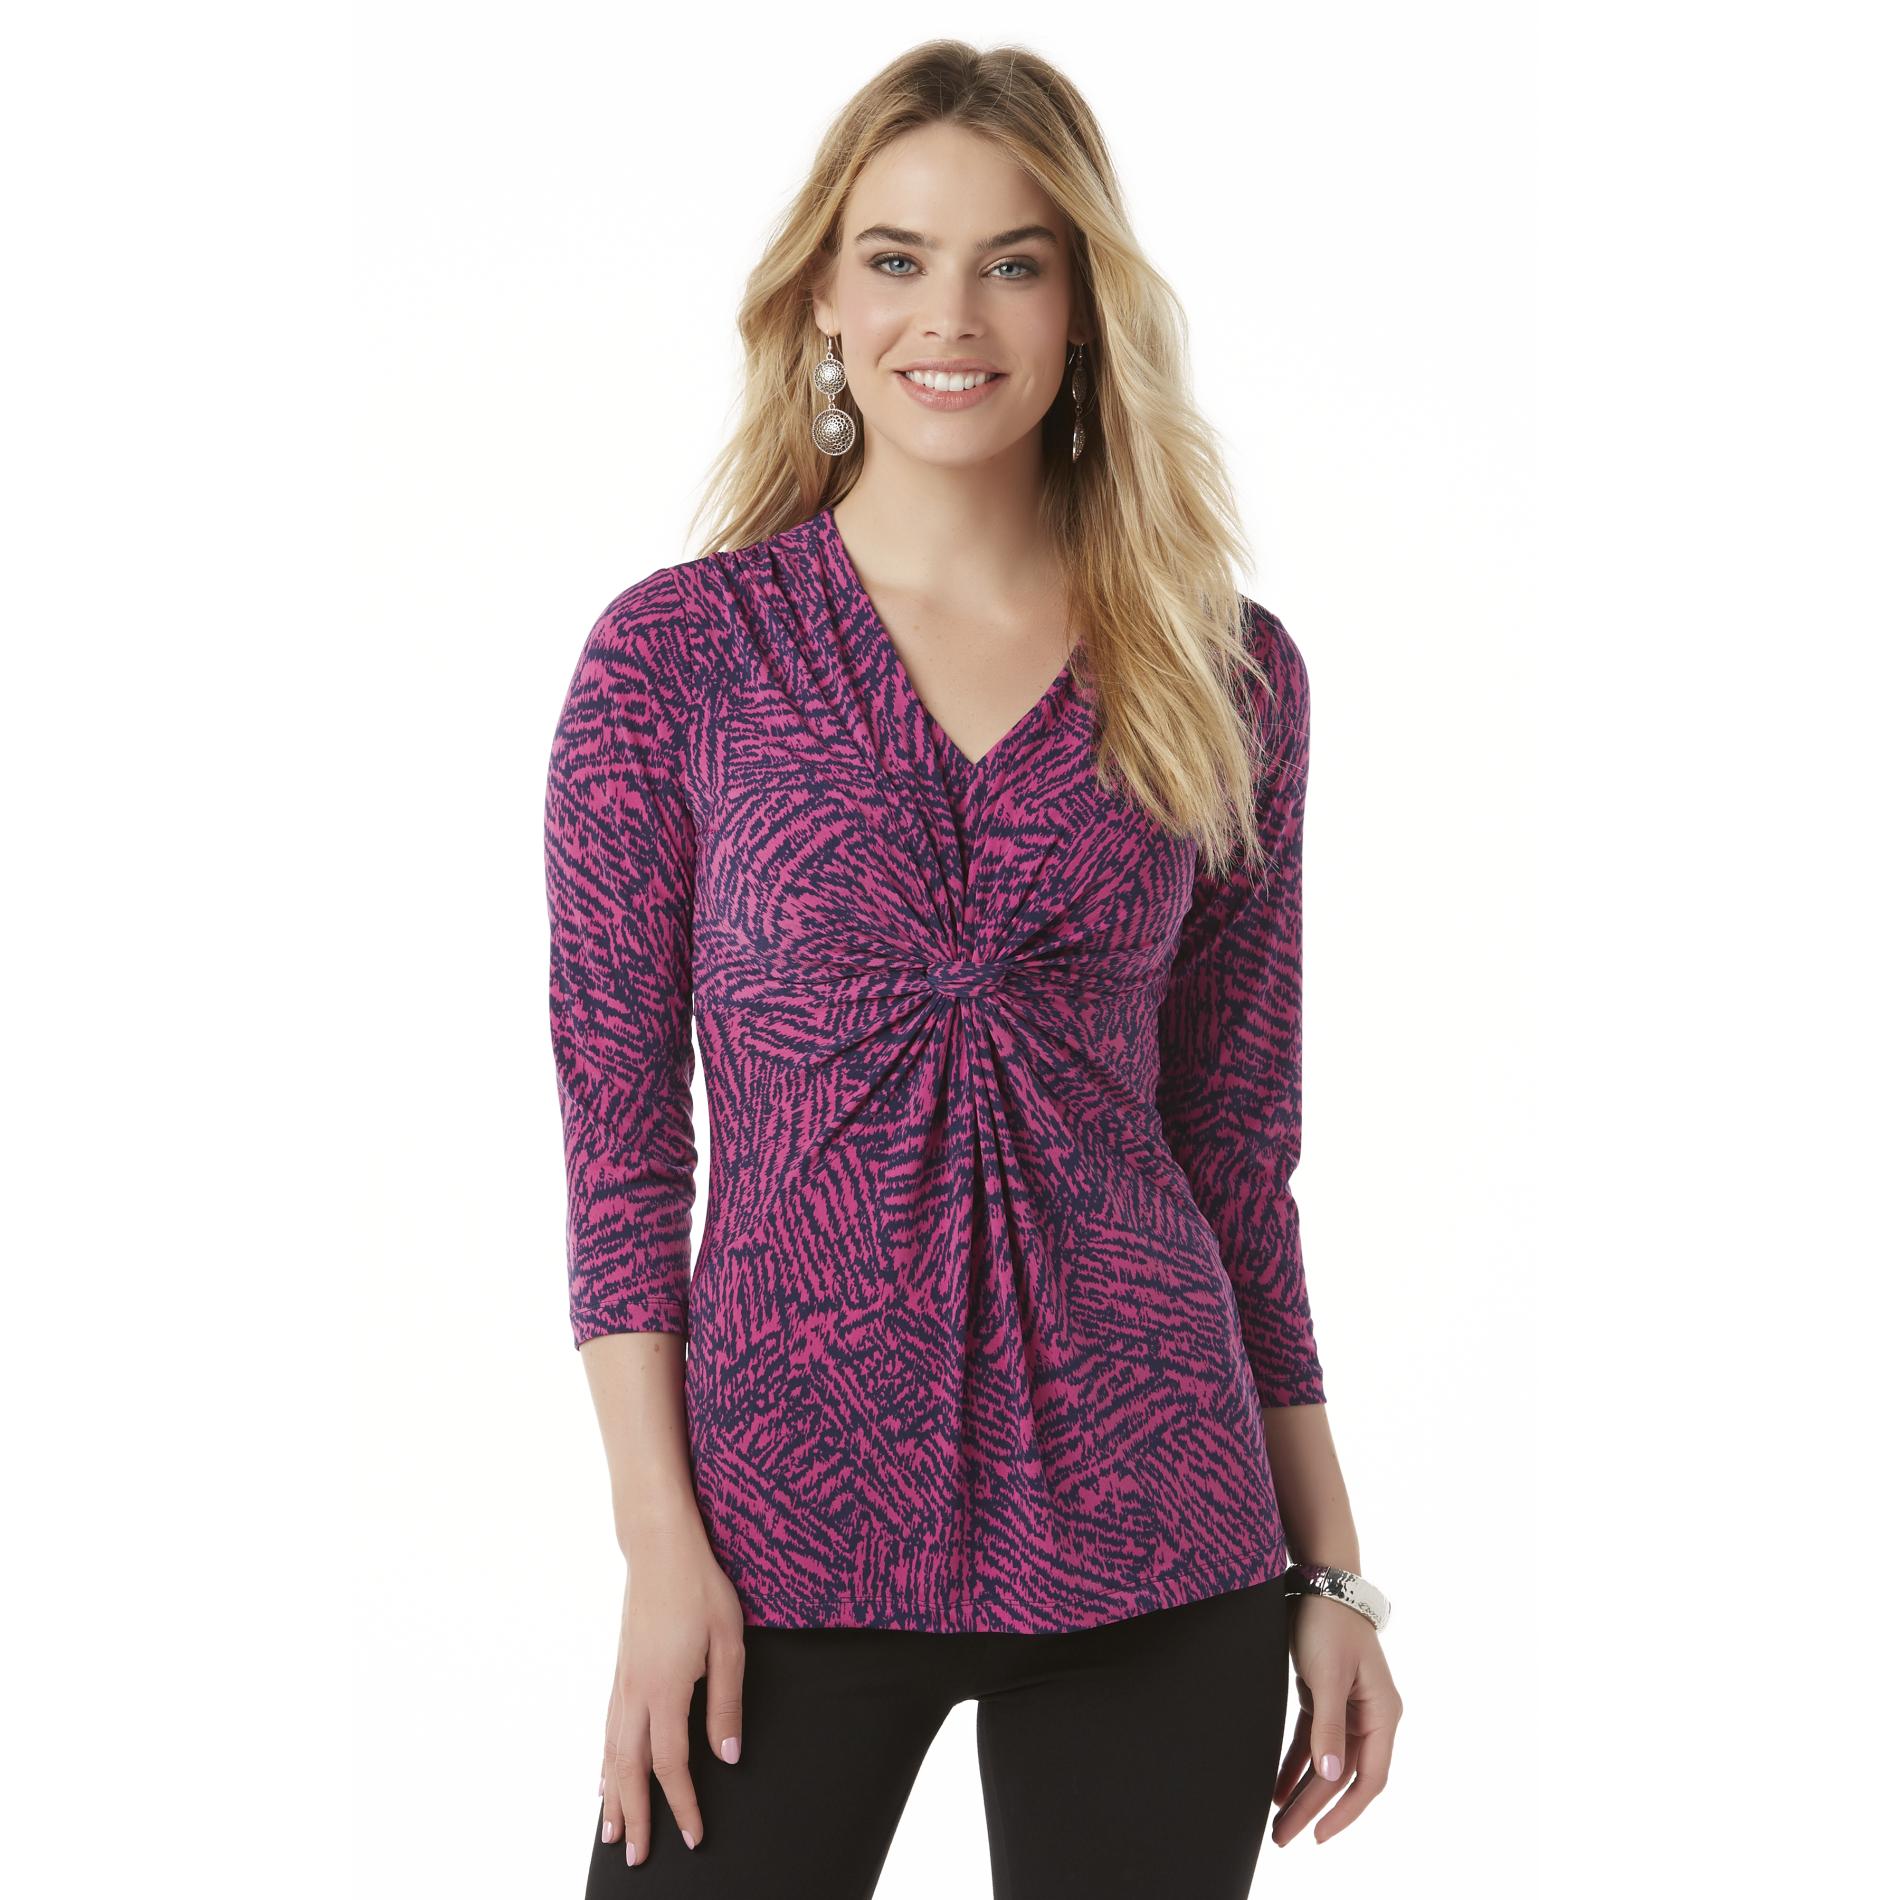 Attention Women's Knot Front Top - Abstract